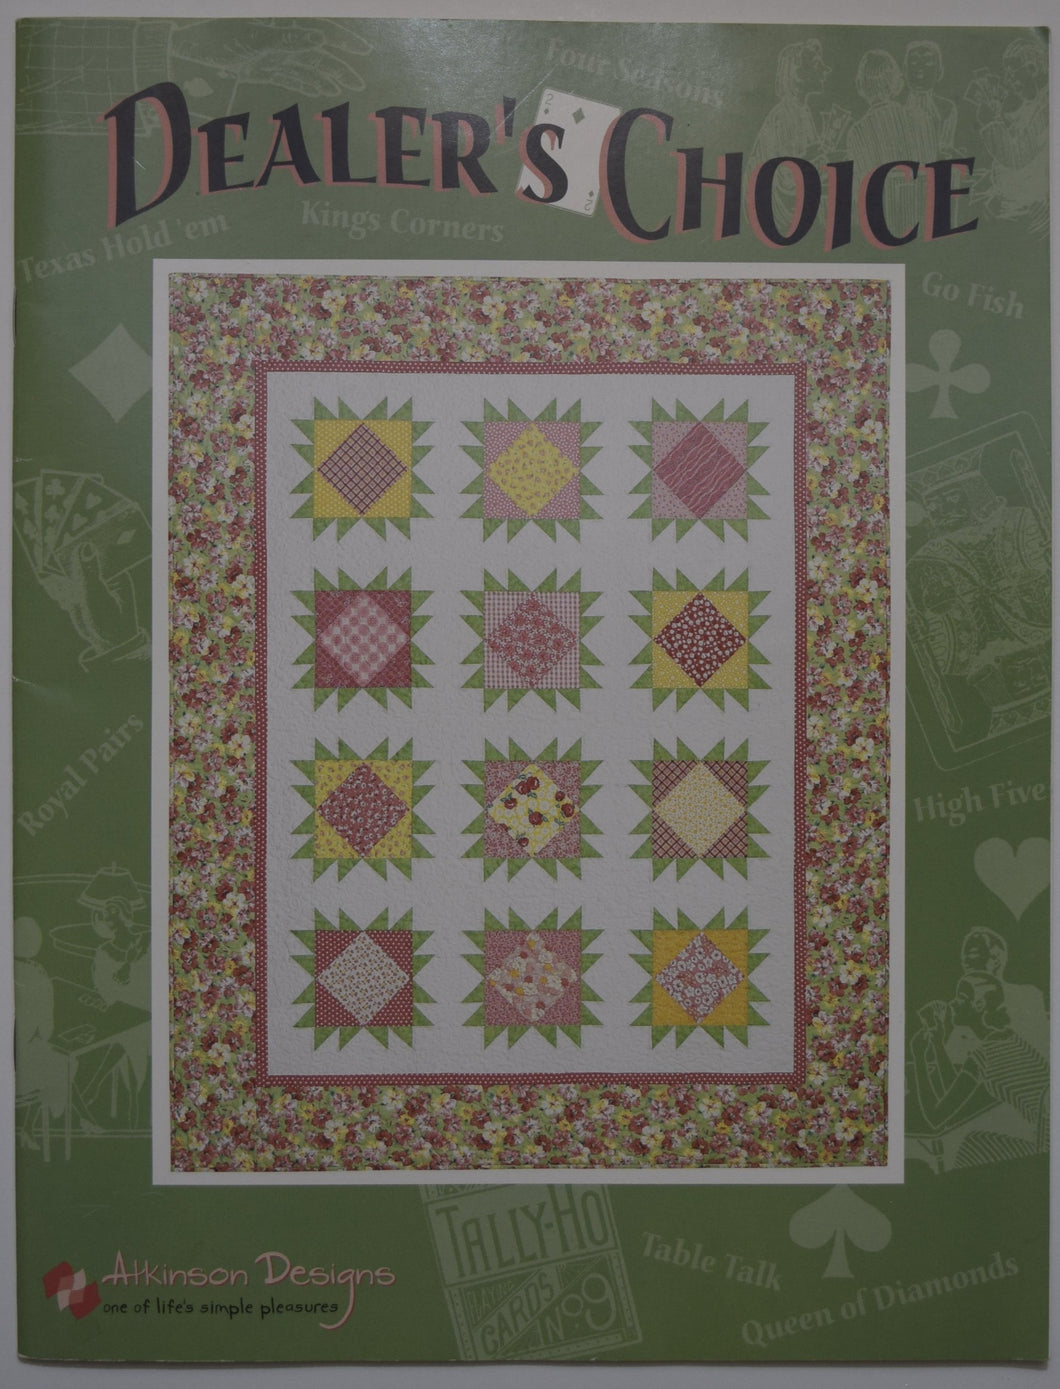 Dealer's Choice by Terry Atkinson